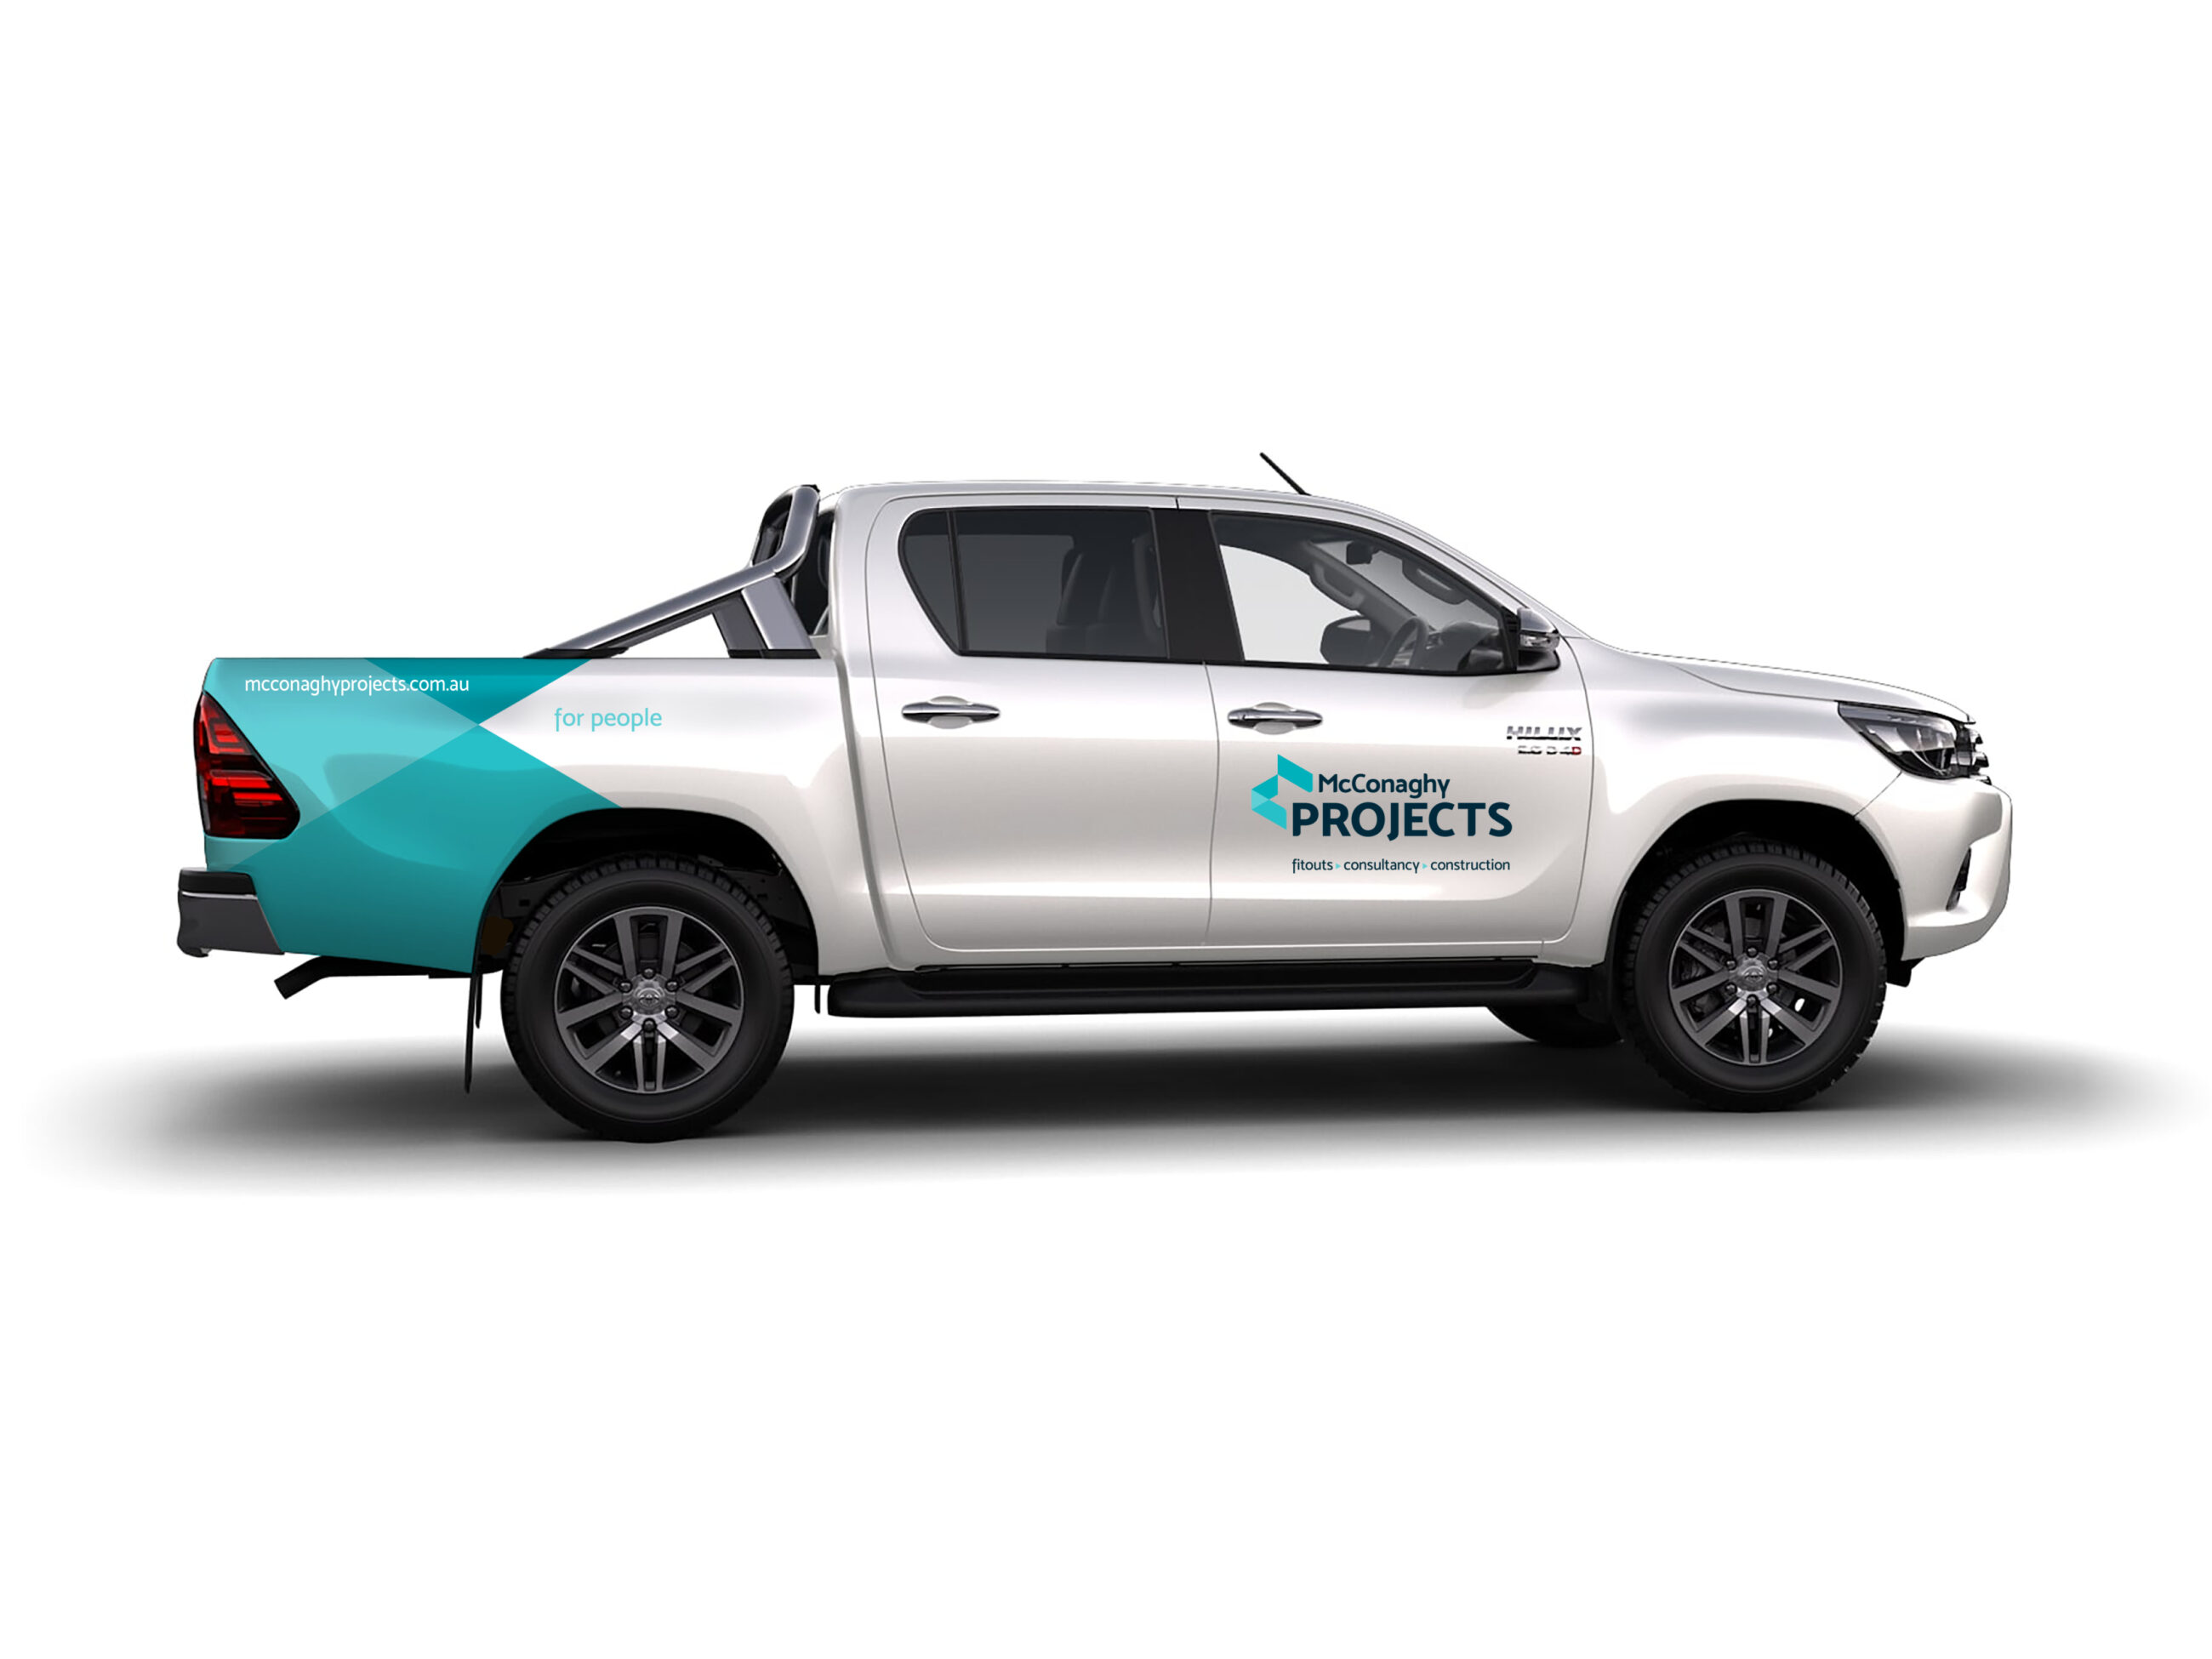 McConaghy design of vehicle wrap with brand identity